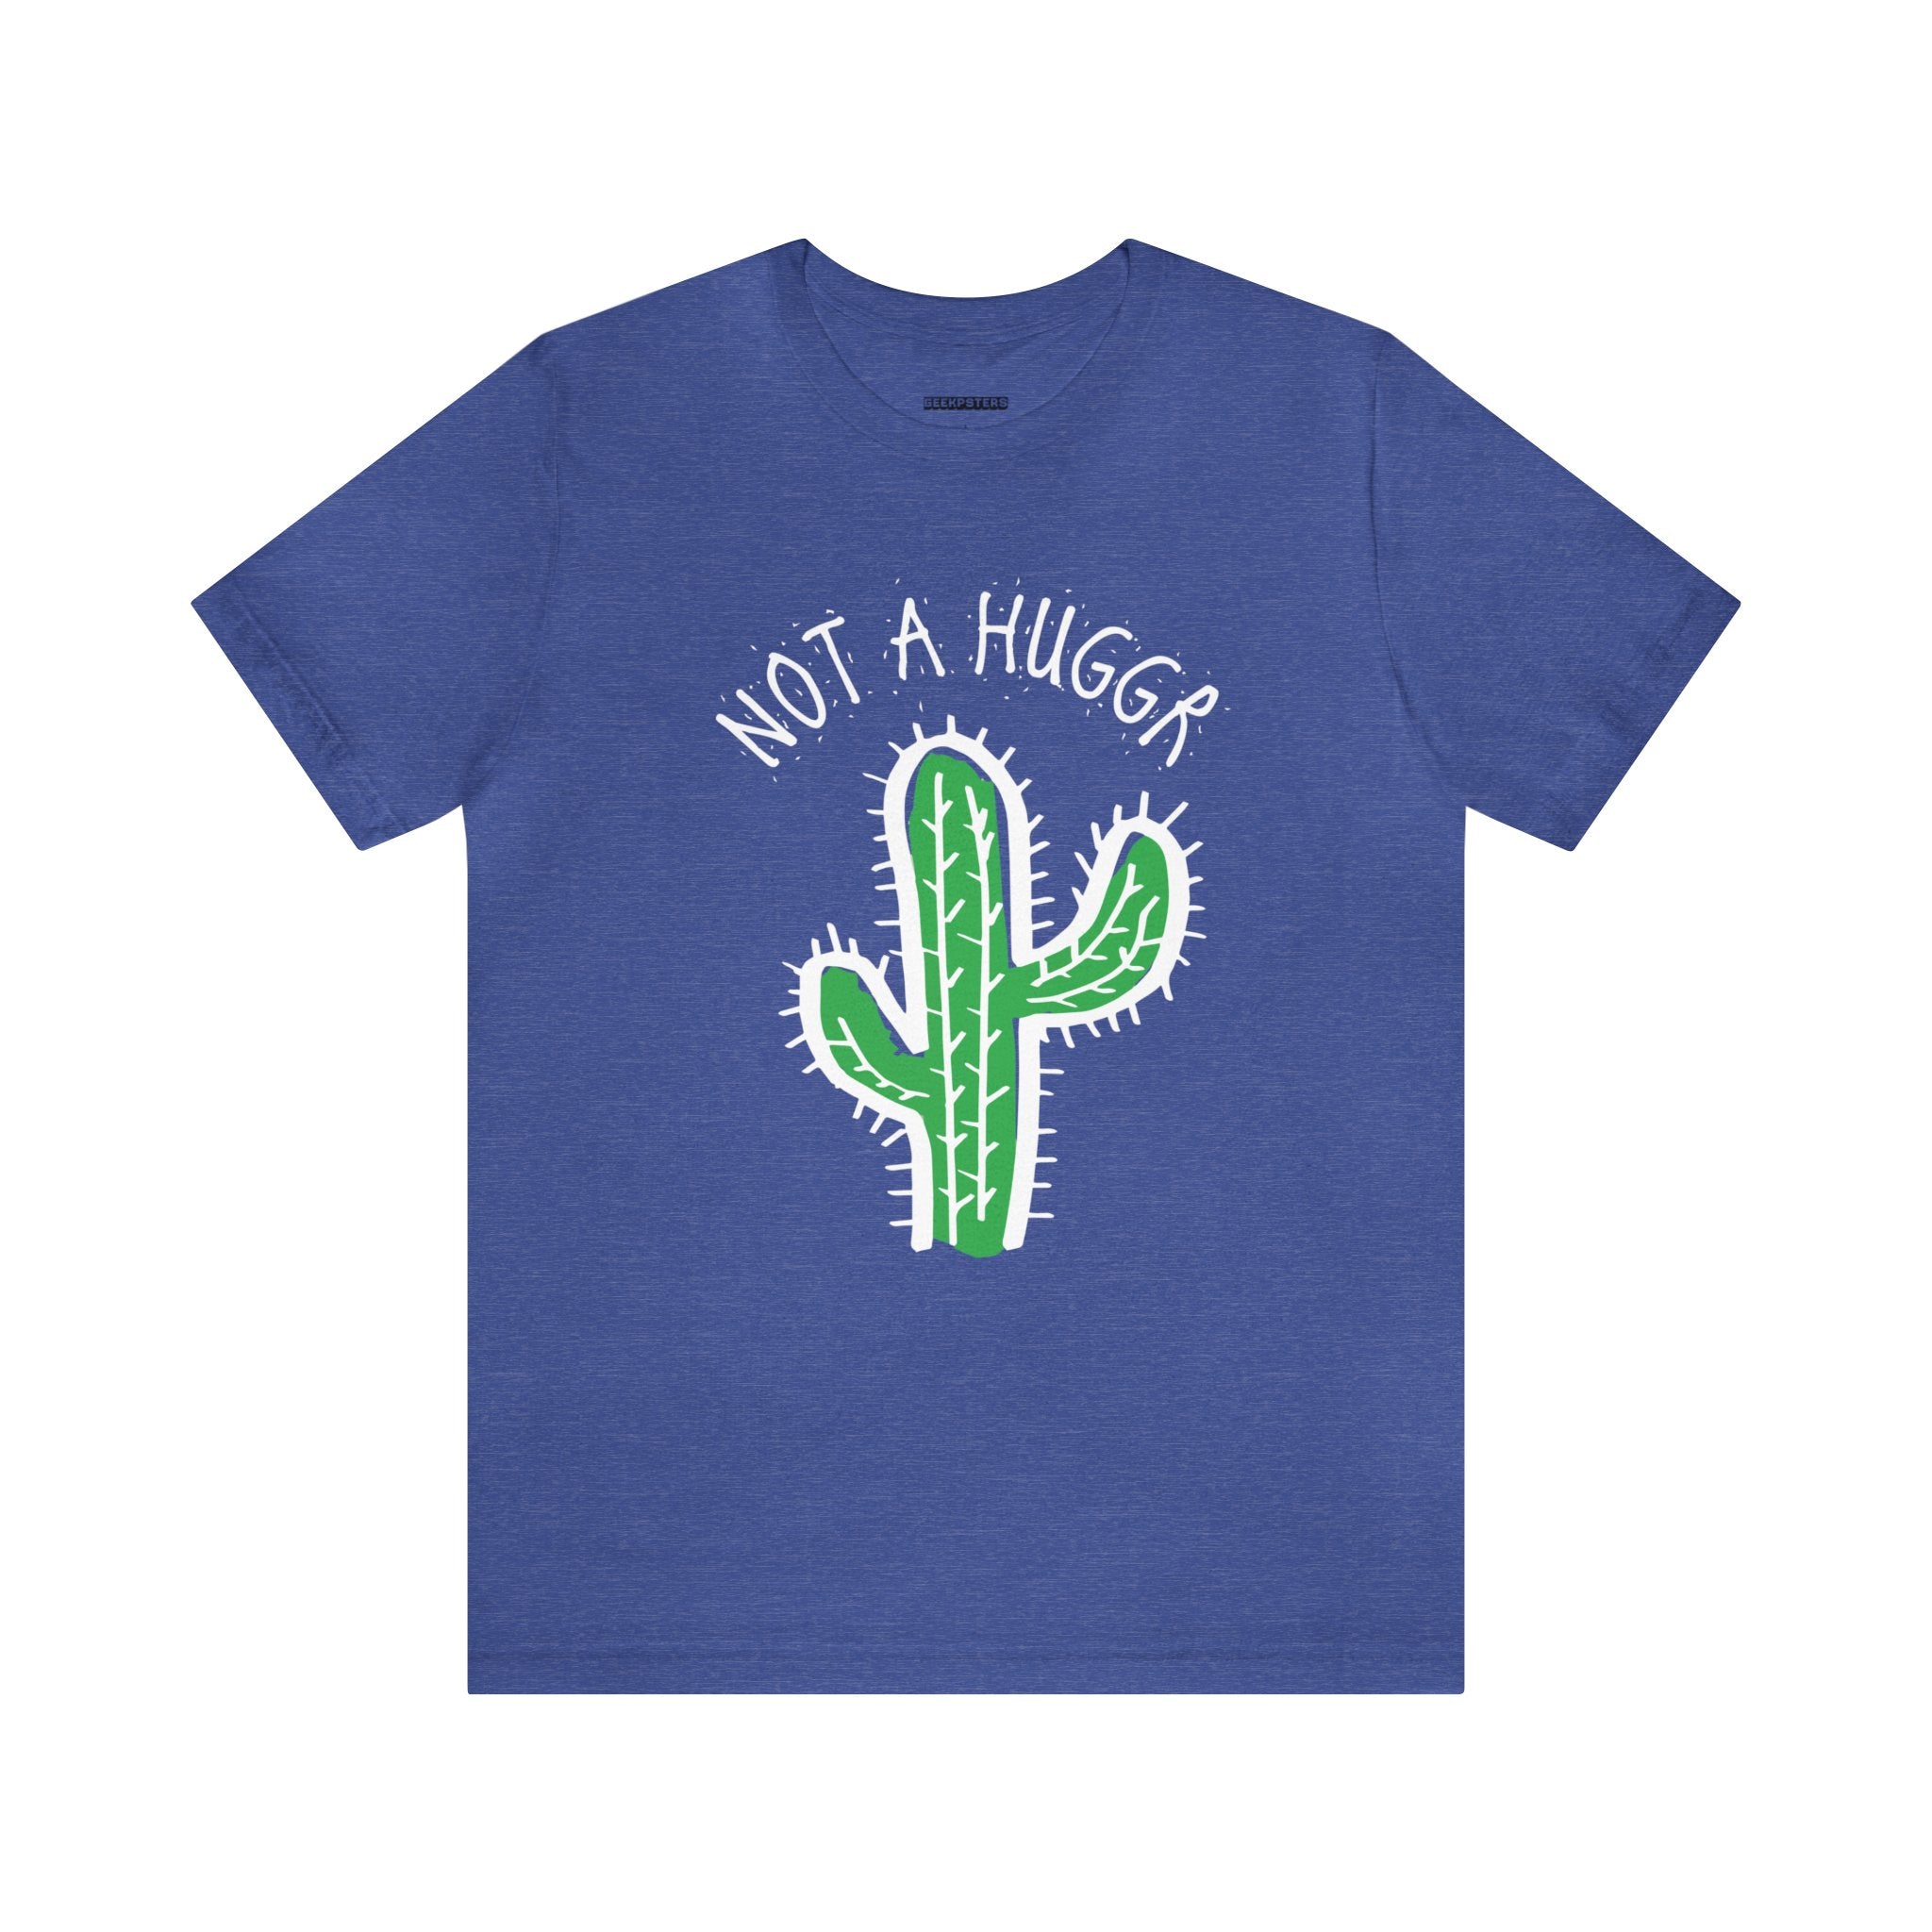 Introducing the Not a Hugger T-Shirt, a unique and stylish t-shirt that promotes the importance of personal space. This trendy t-shirt showcases a design that is definitely not your average Not a Hugger T-Shirt.